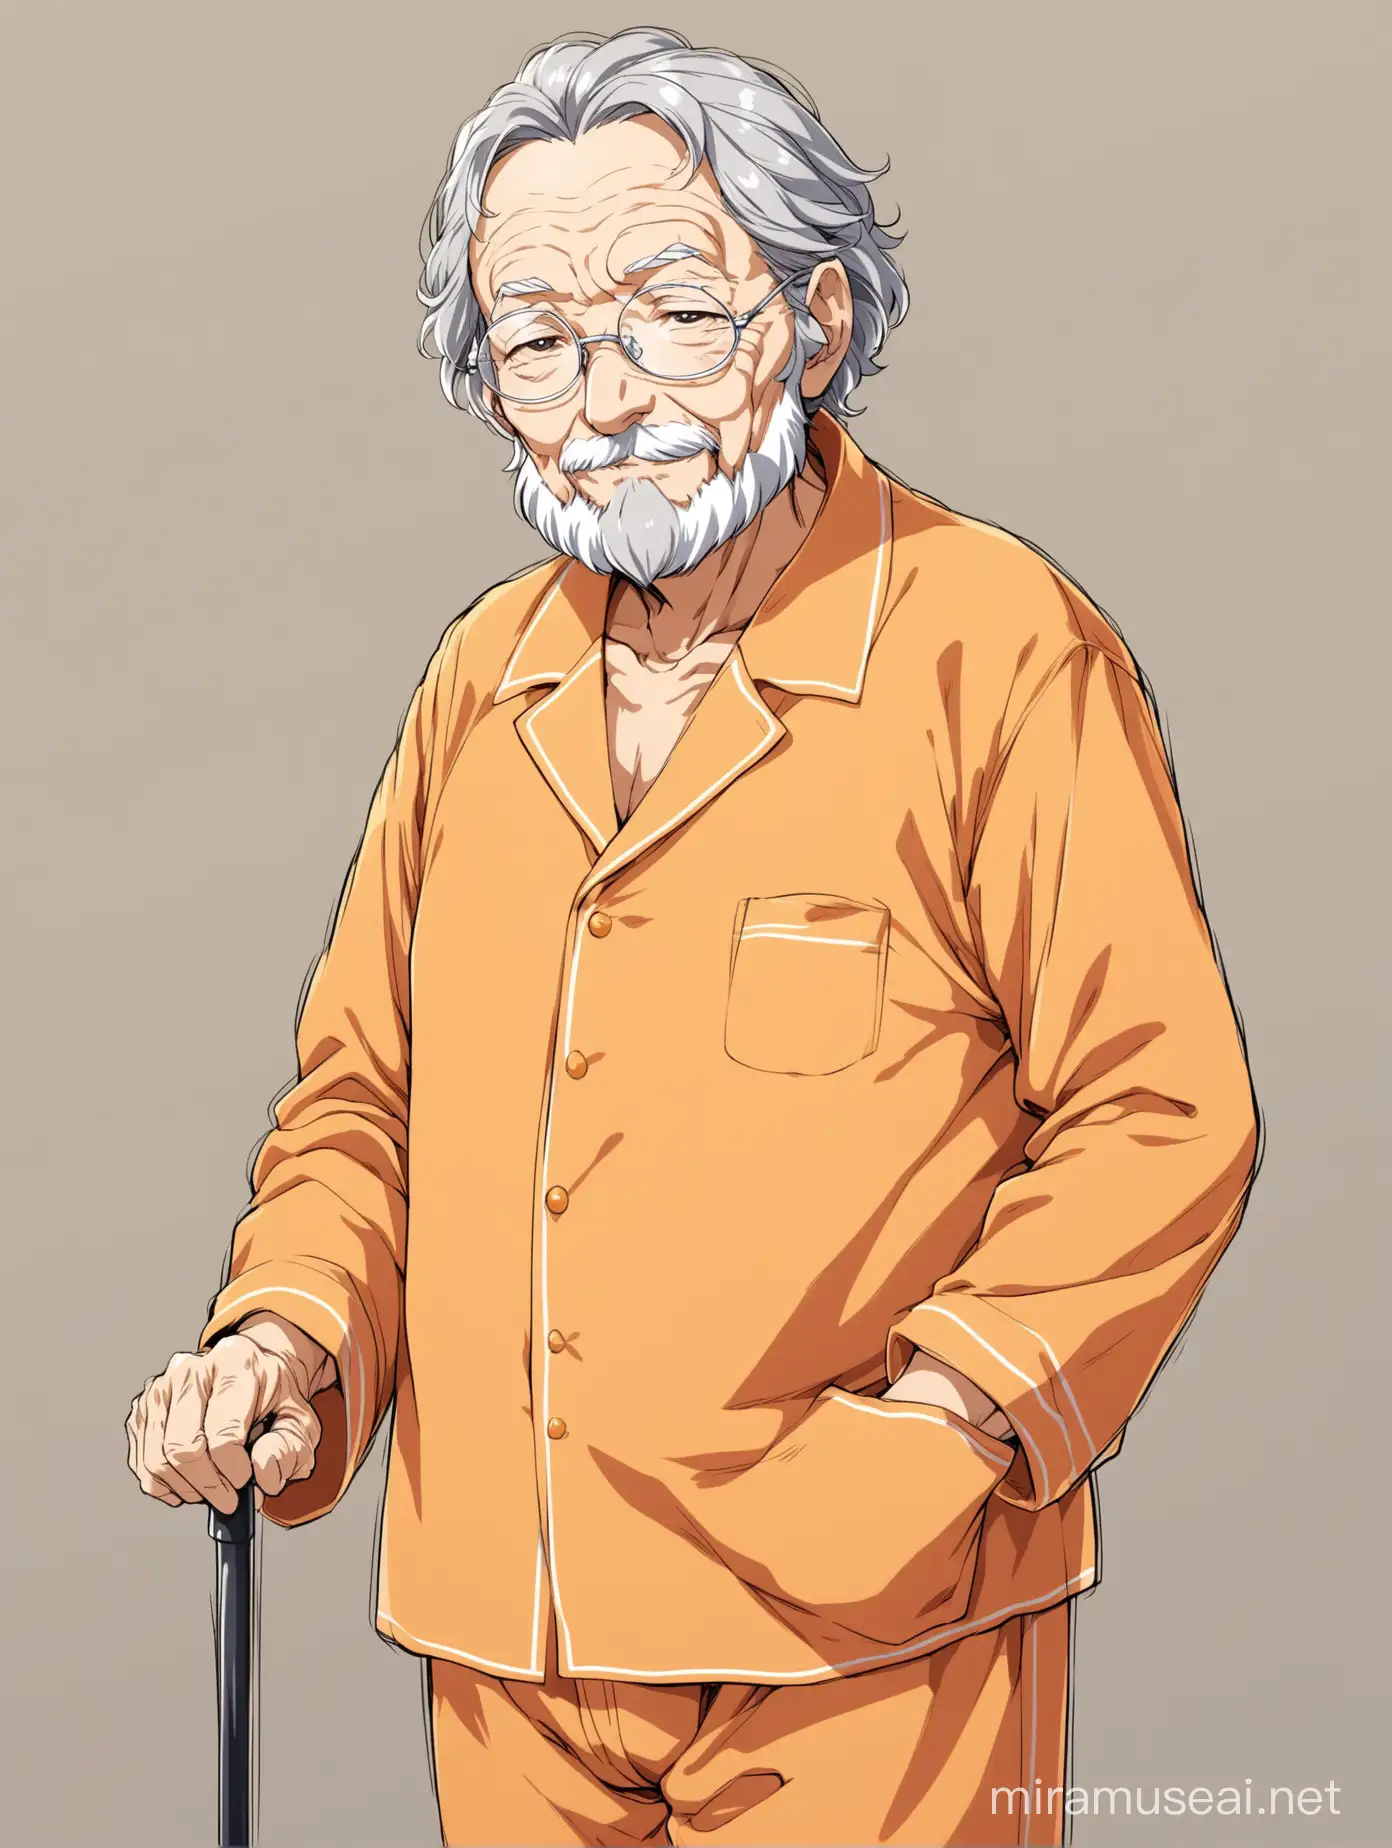 Anime Portrait Wise and Friendly Old Man in Light Orange Pajamas with Cane